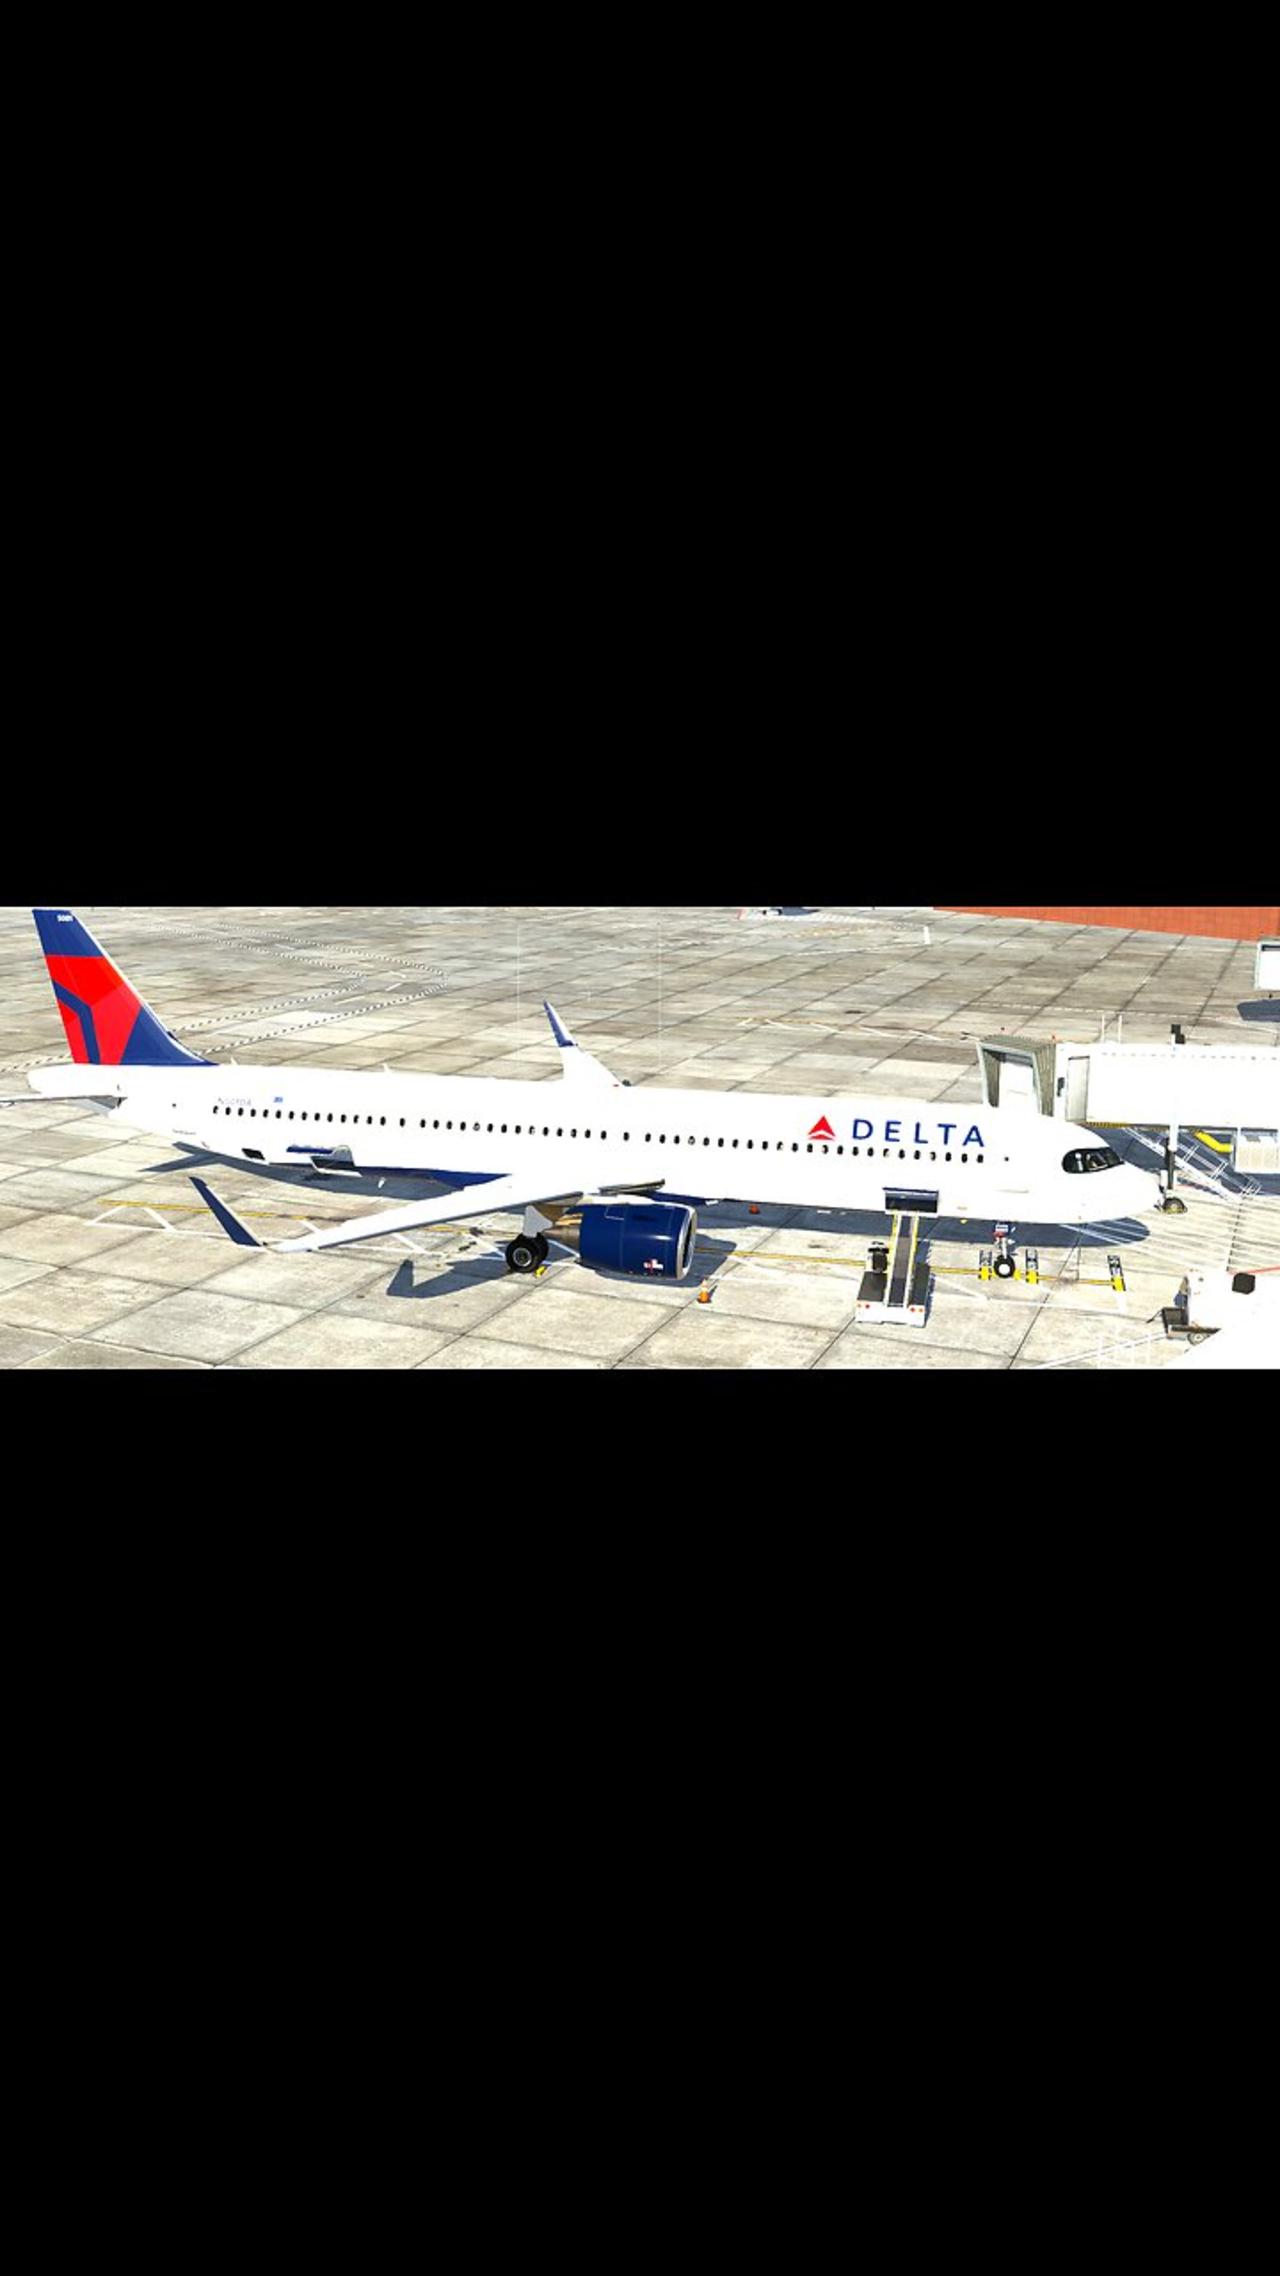 DELTA VIRTUAL Airlines  NASCAR TOUR Round 9: DEEP OF HEARTS OF TEXAS